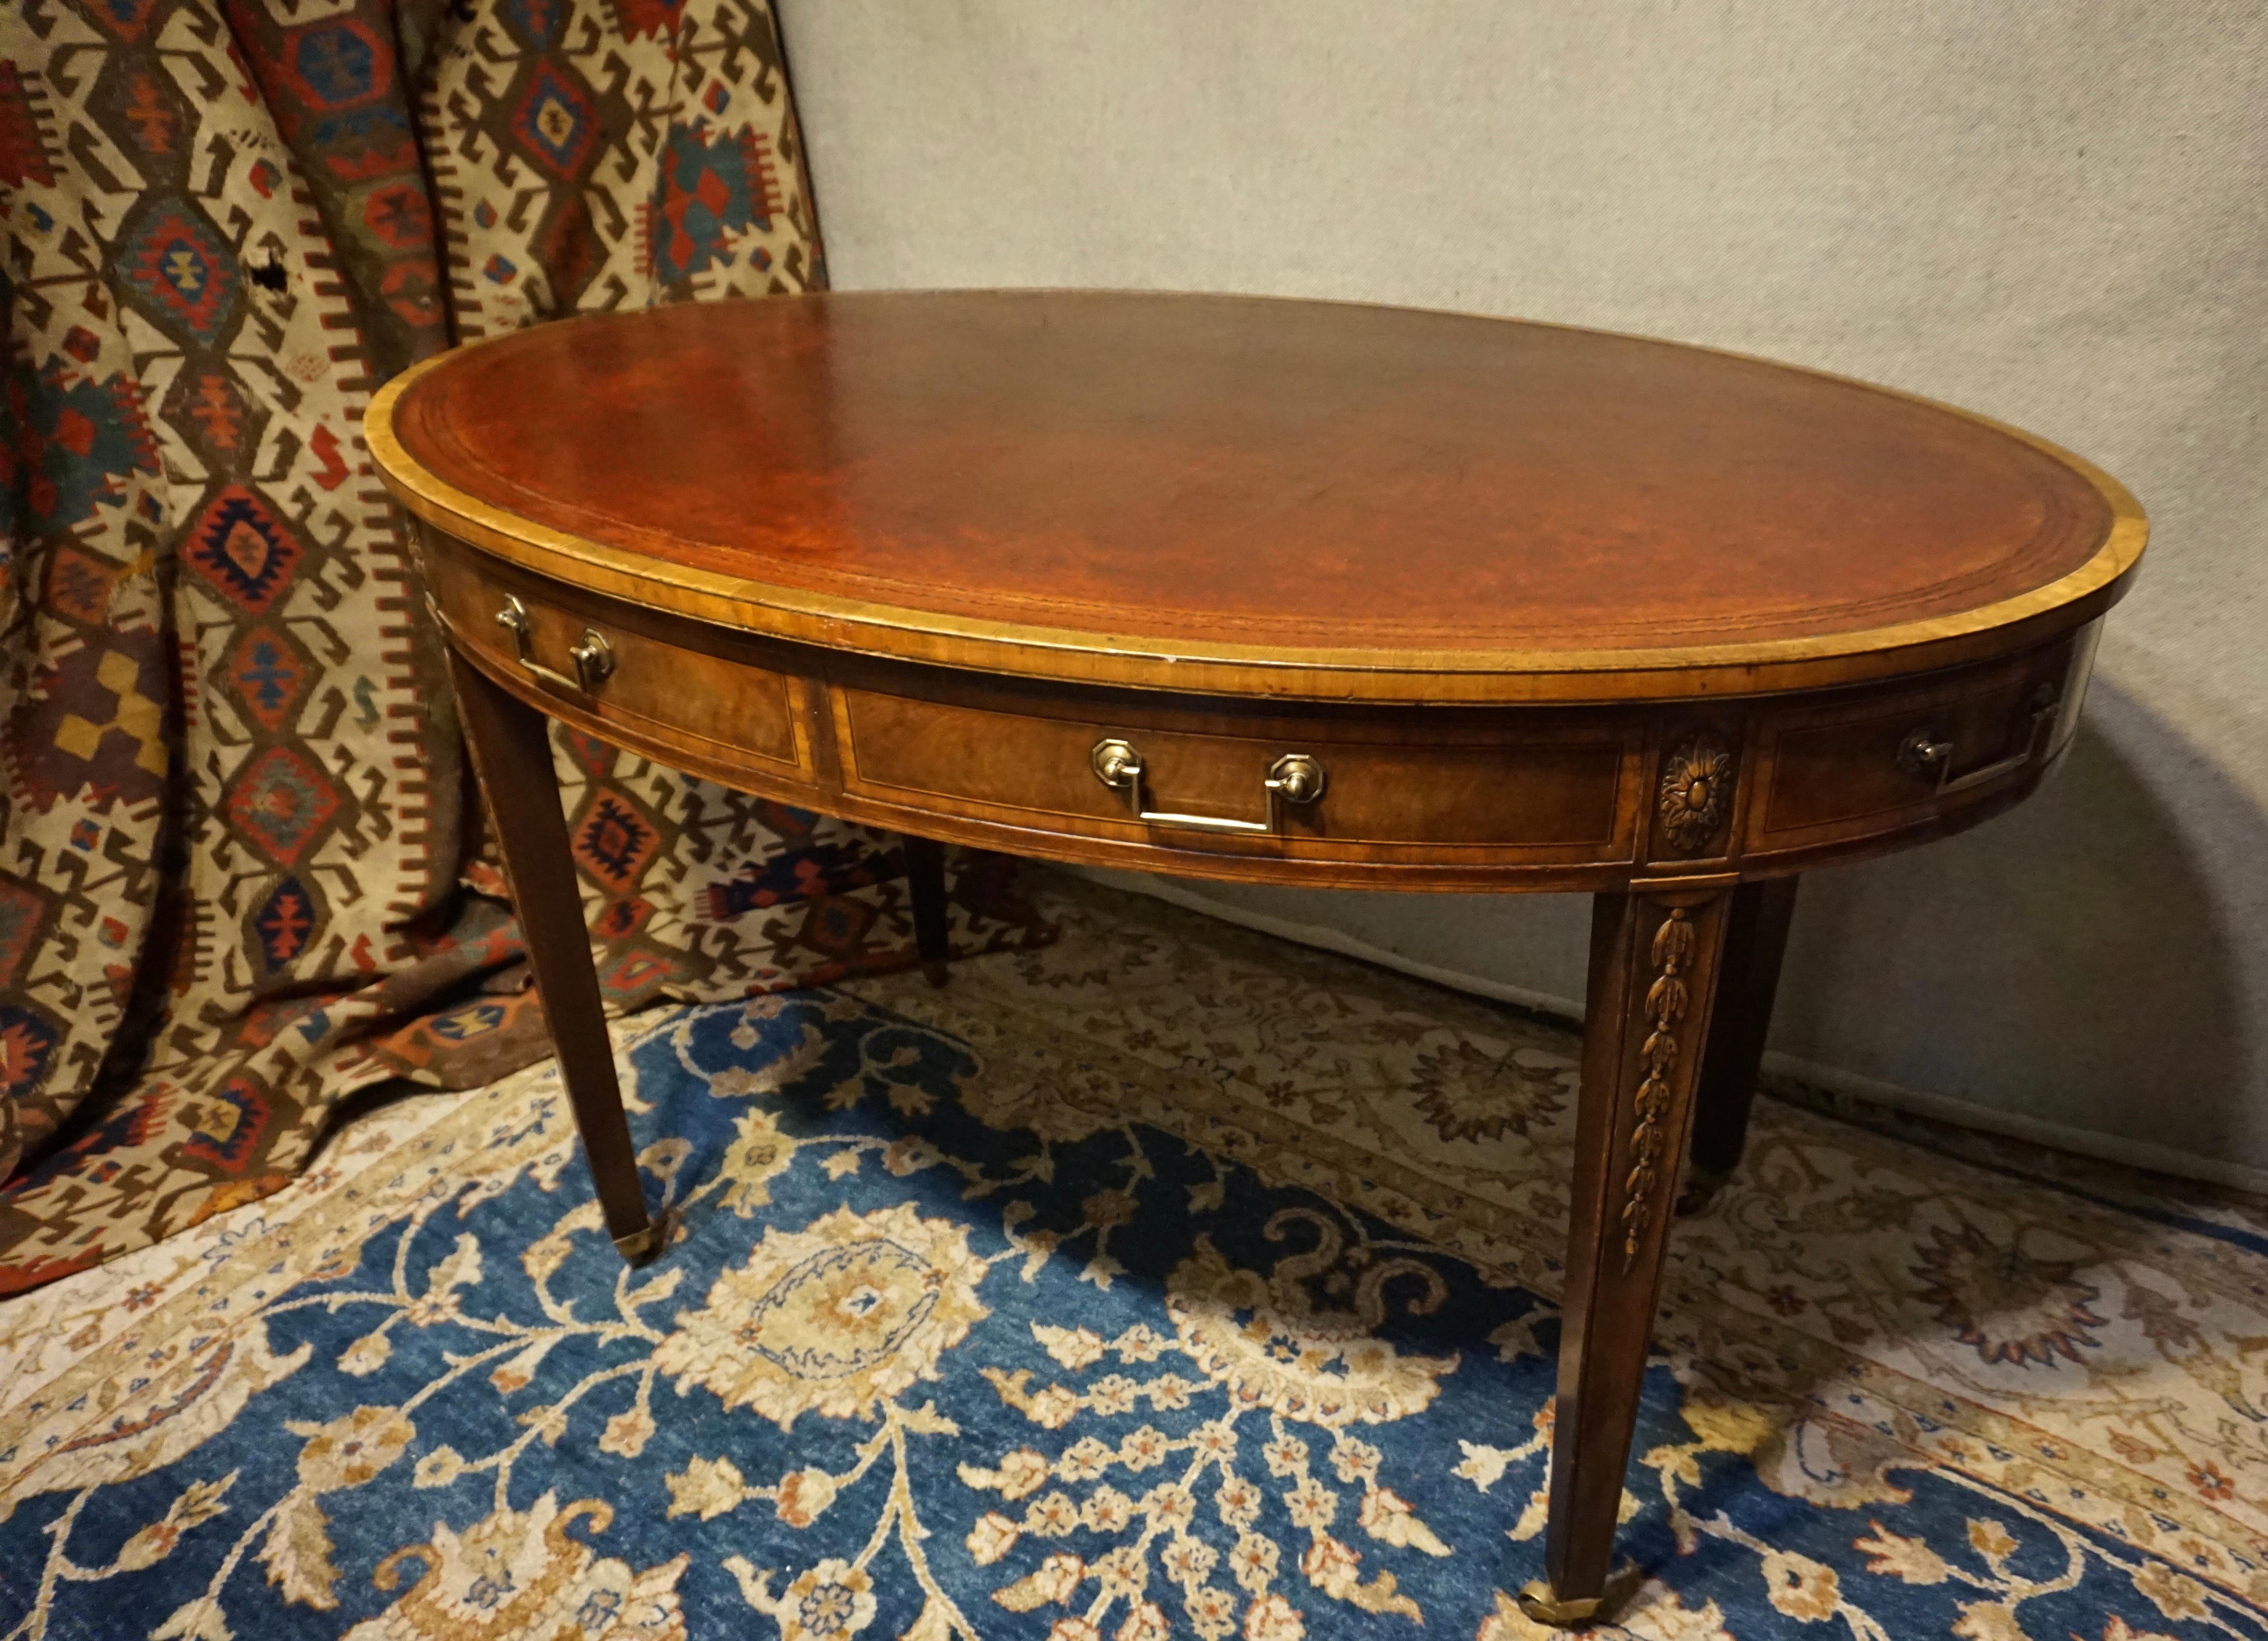 Hand-Crafted English Regency Revival Mahogany Oval Table with Gilt Leather Top